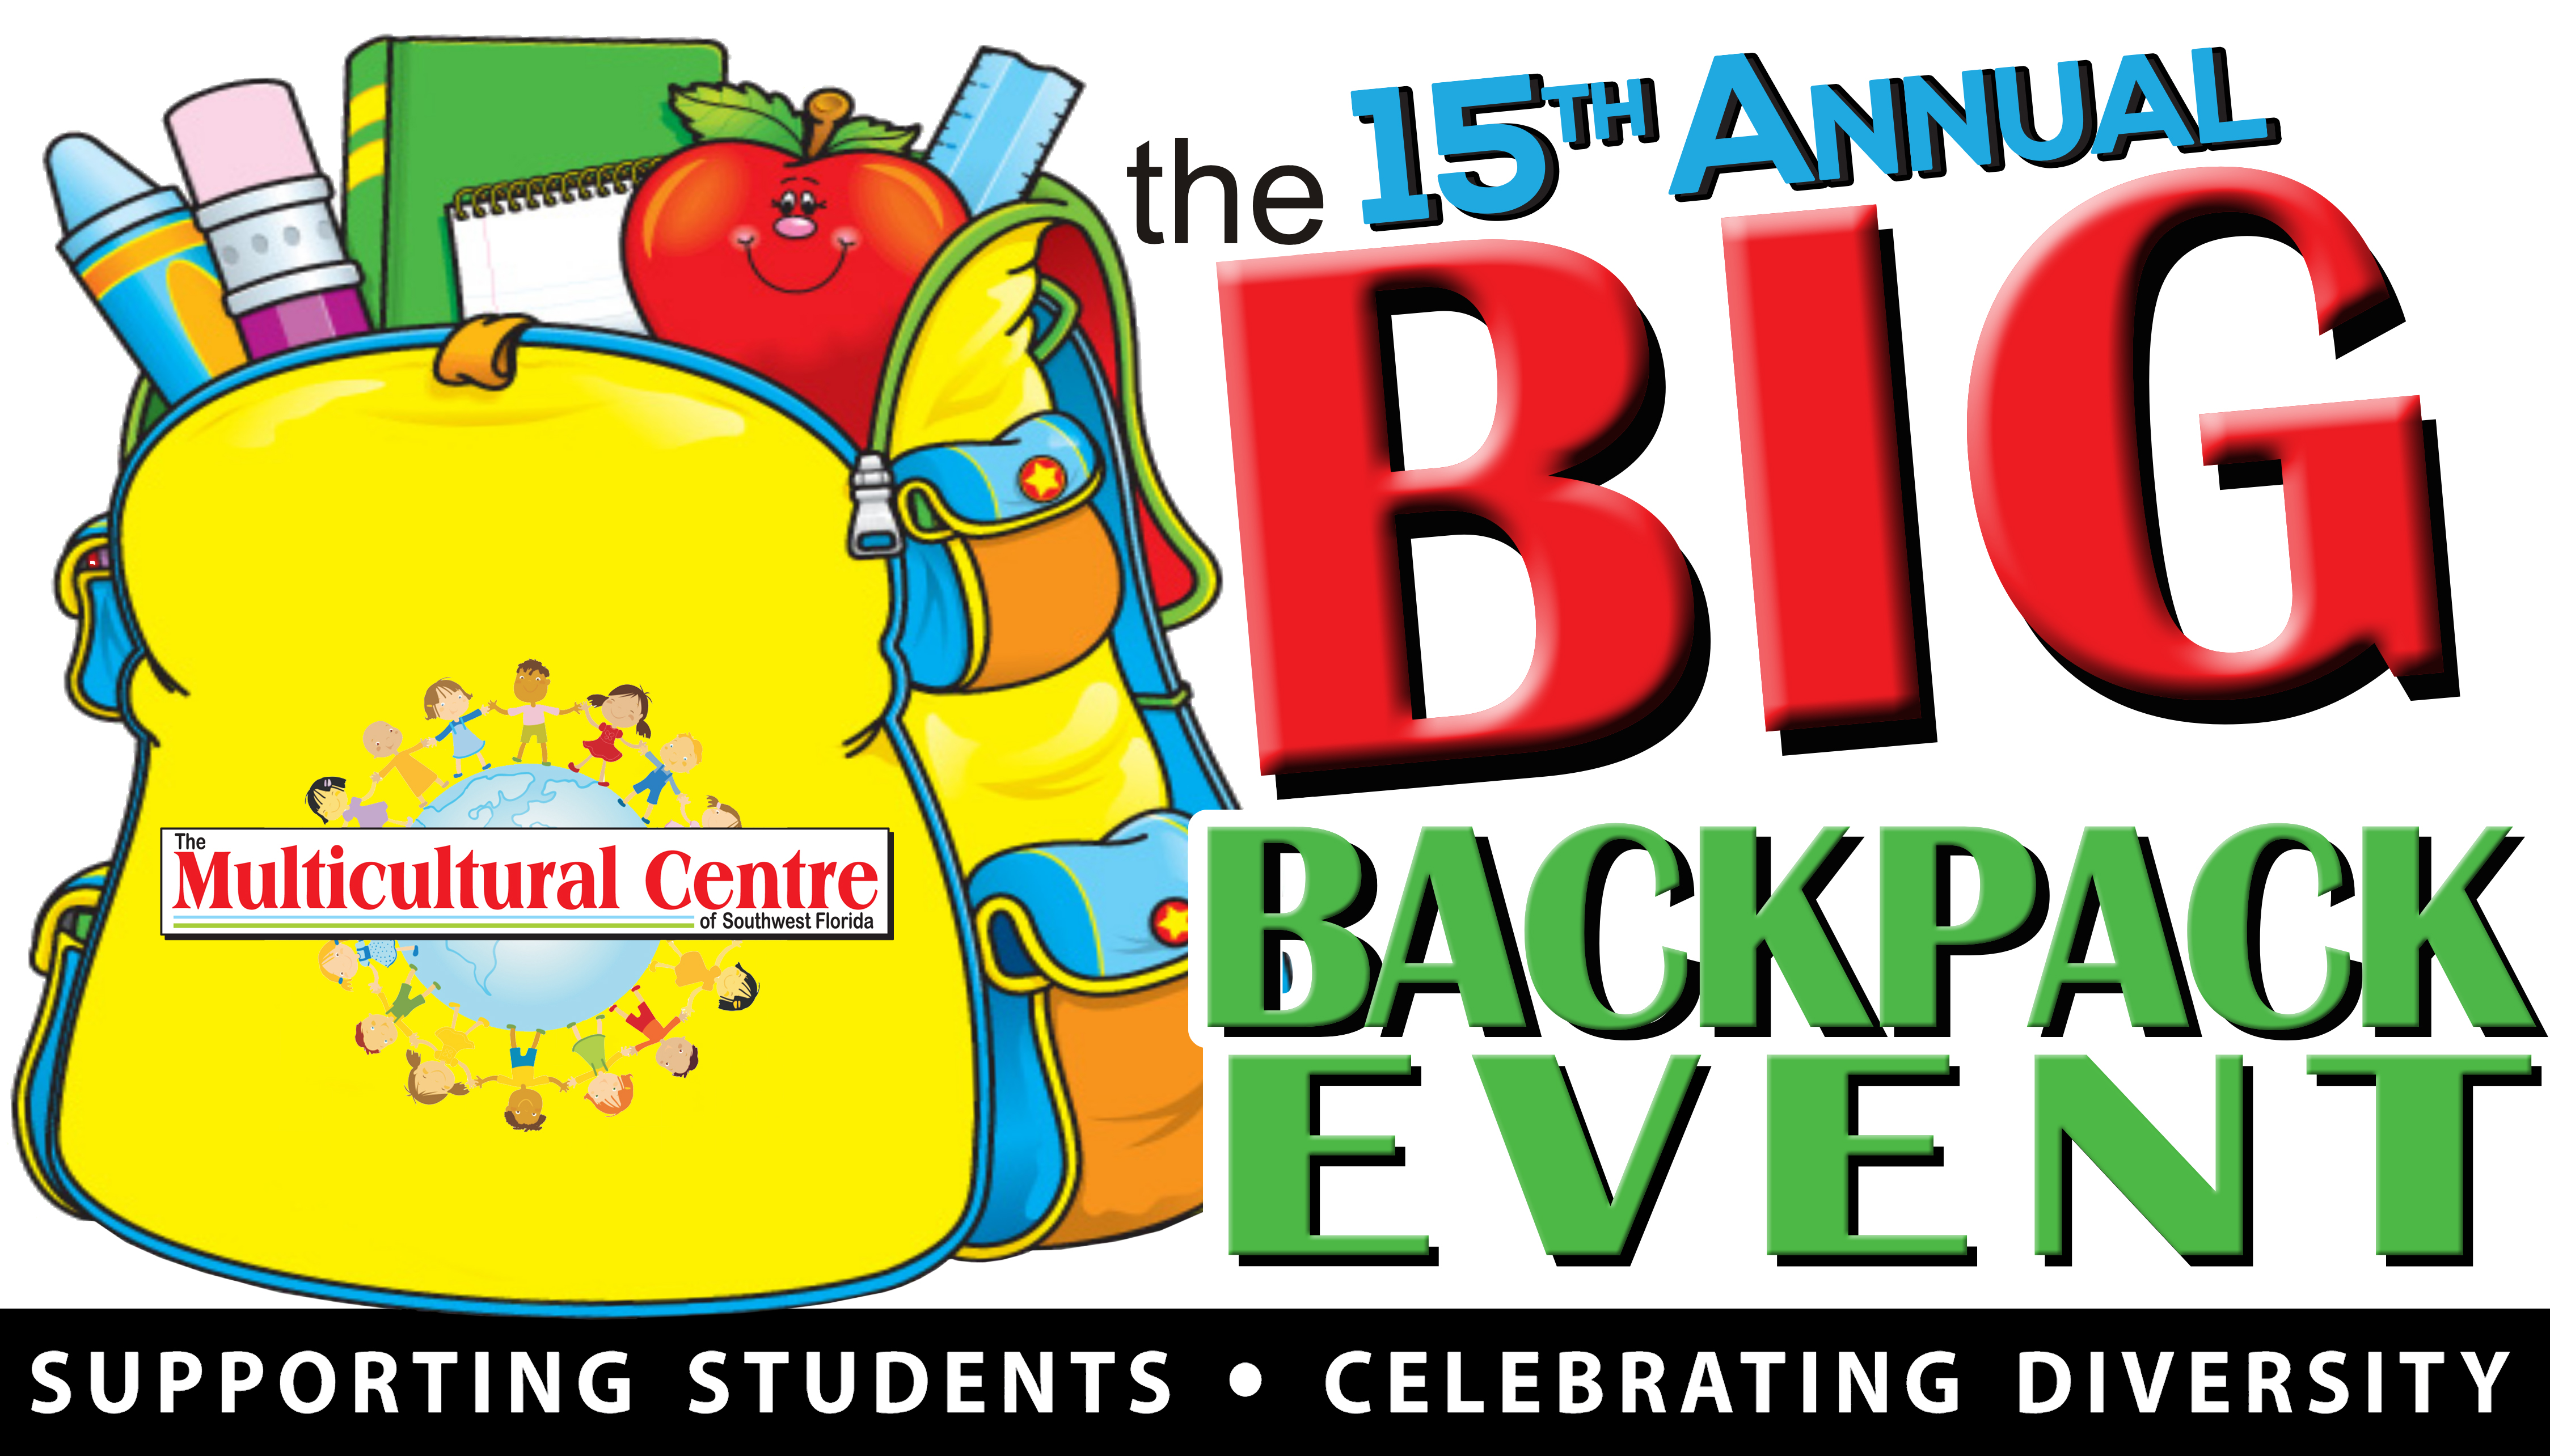 The Multicultural Centre of Southwest Florida’s BIG Backpack Event set to distribute free backpacks and school supplies to a record 2,500 students